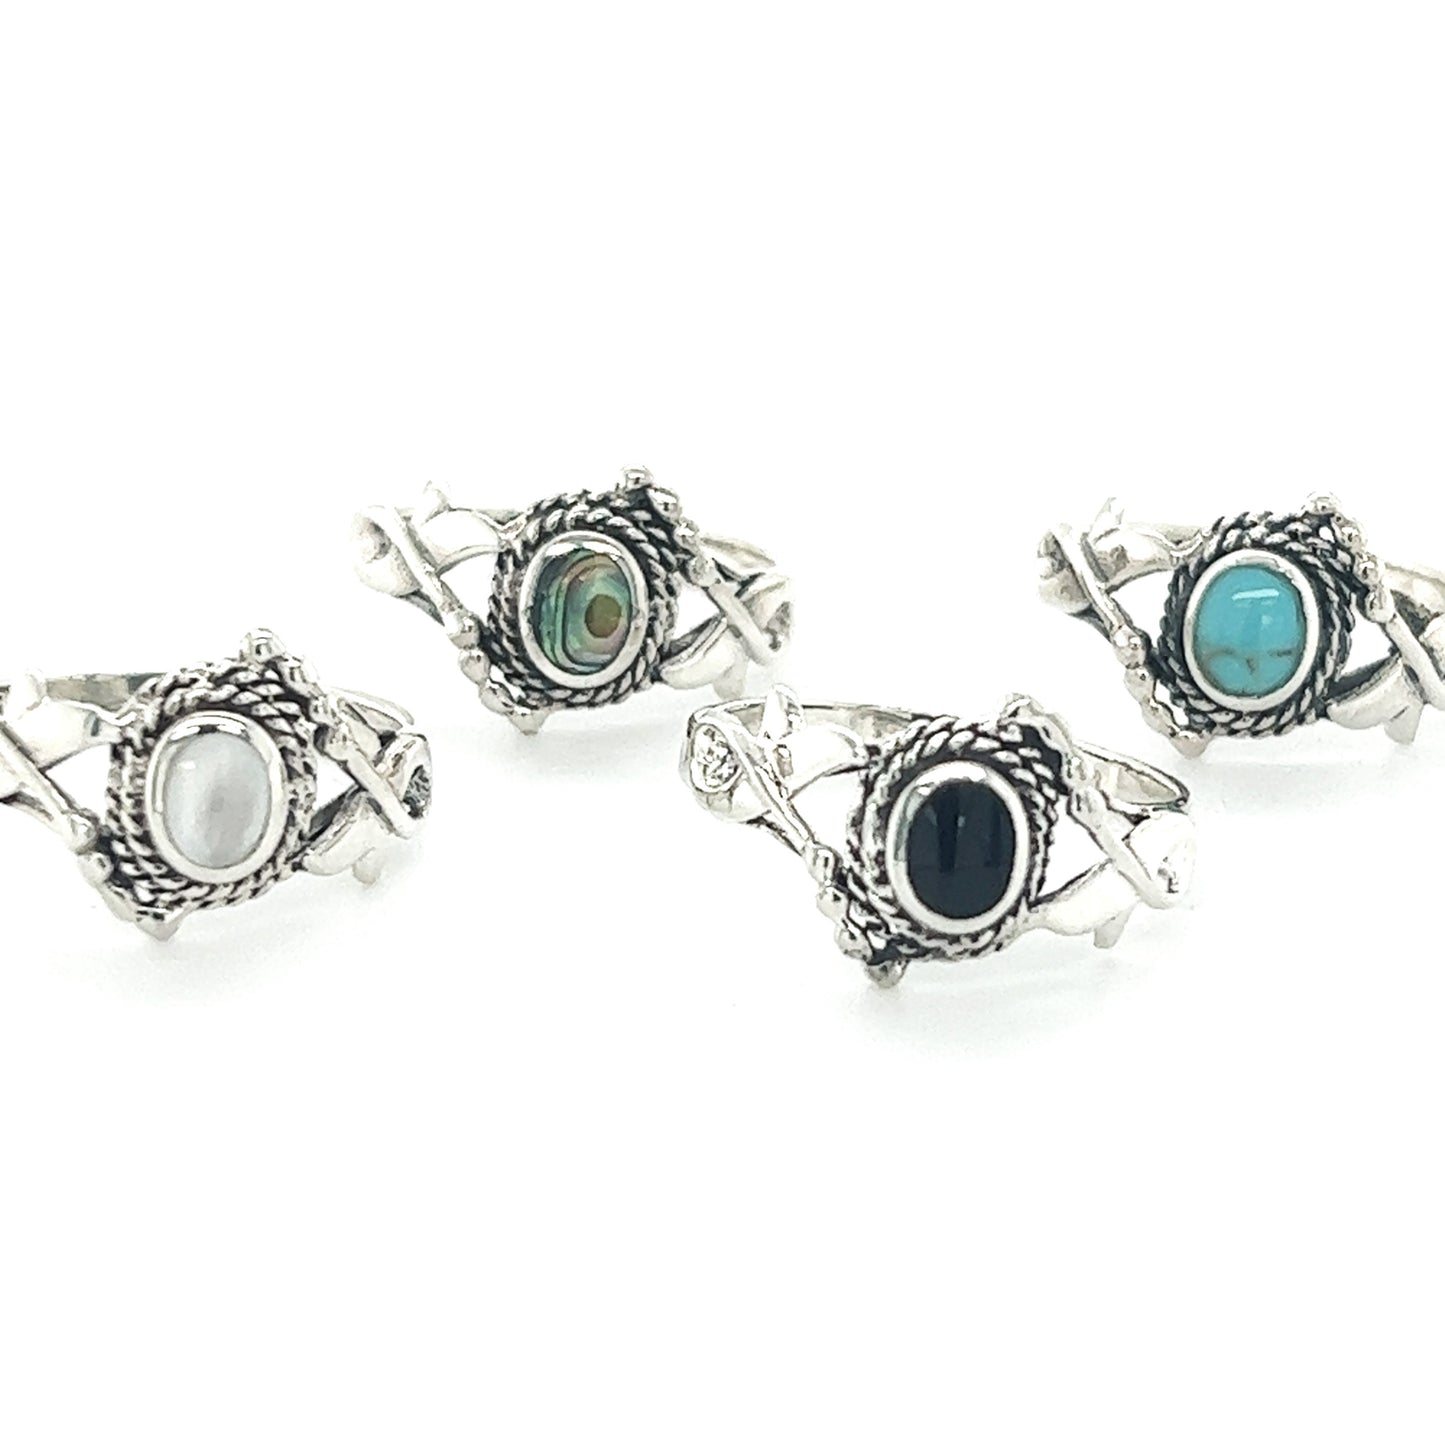 Four silver rings with Decorated Freeform Inlay Stone Rings, boasting a Bali boho vibe.